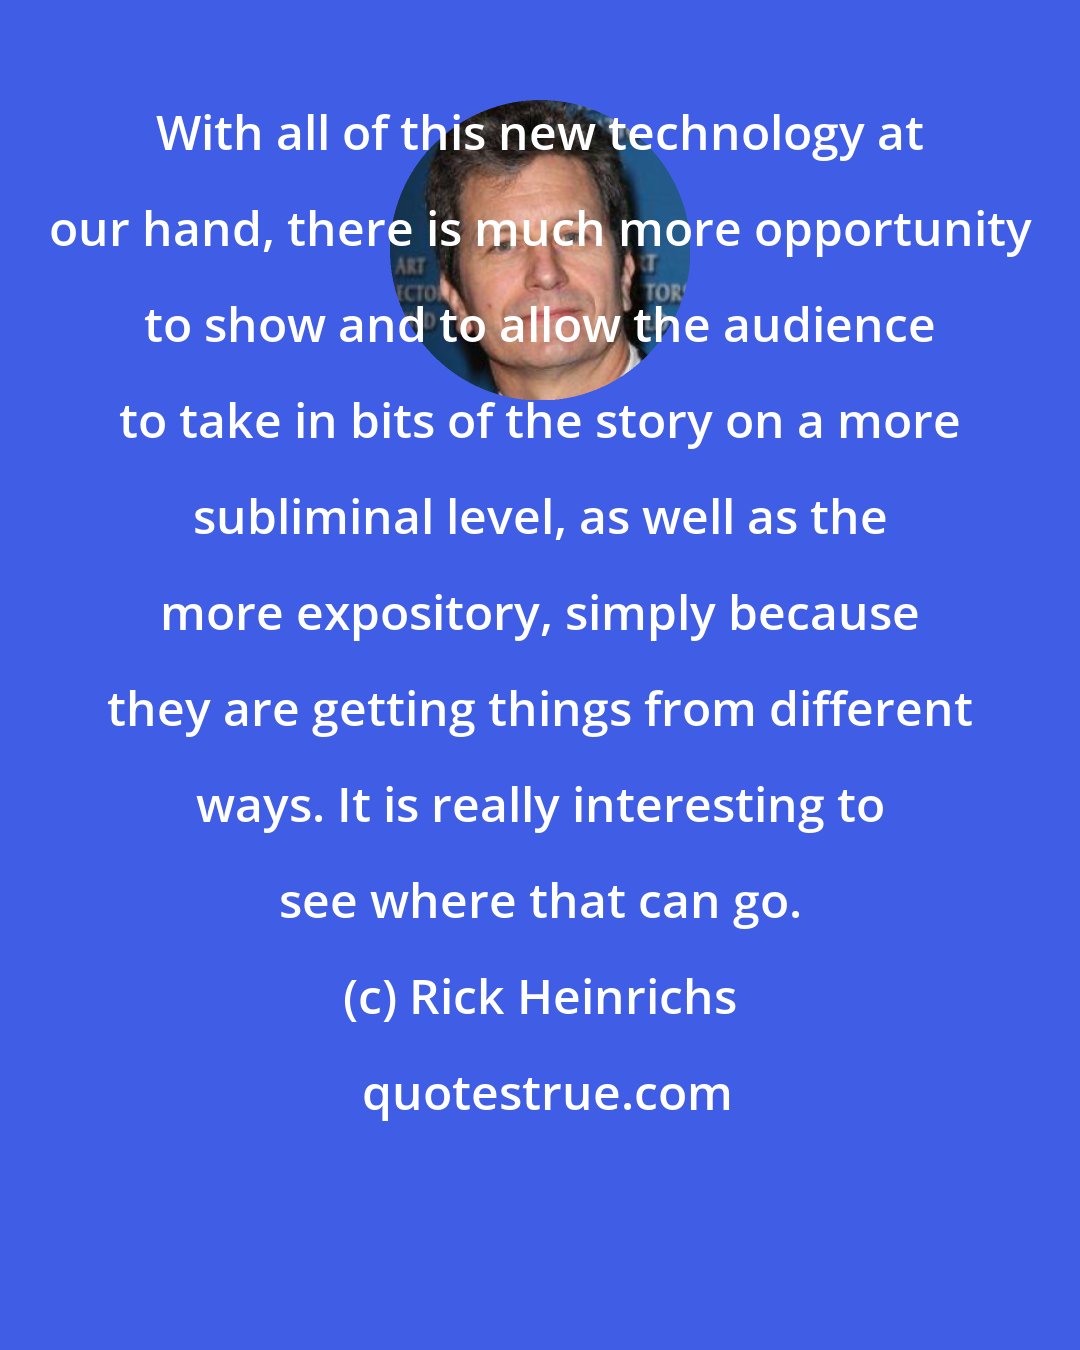 Rick Heinrichs: With all of this new technology at our hand, there is much more opportunity to show and to allow the audience to take in bits of the story on a more subliminal level, as well as the more expository, simply because they are getting things from different ways. It is really interesting to see where that can go.